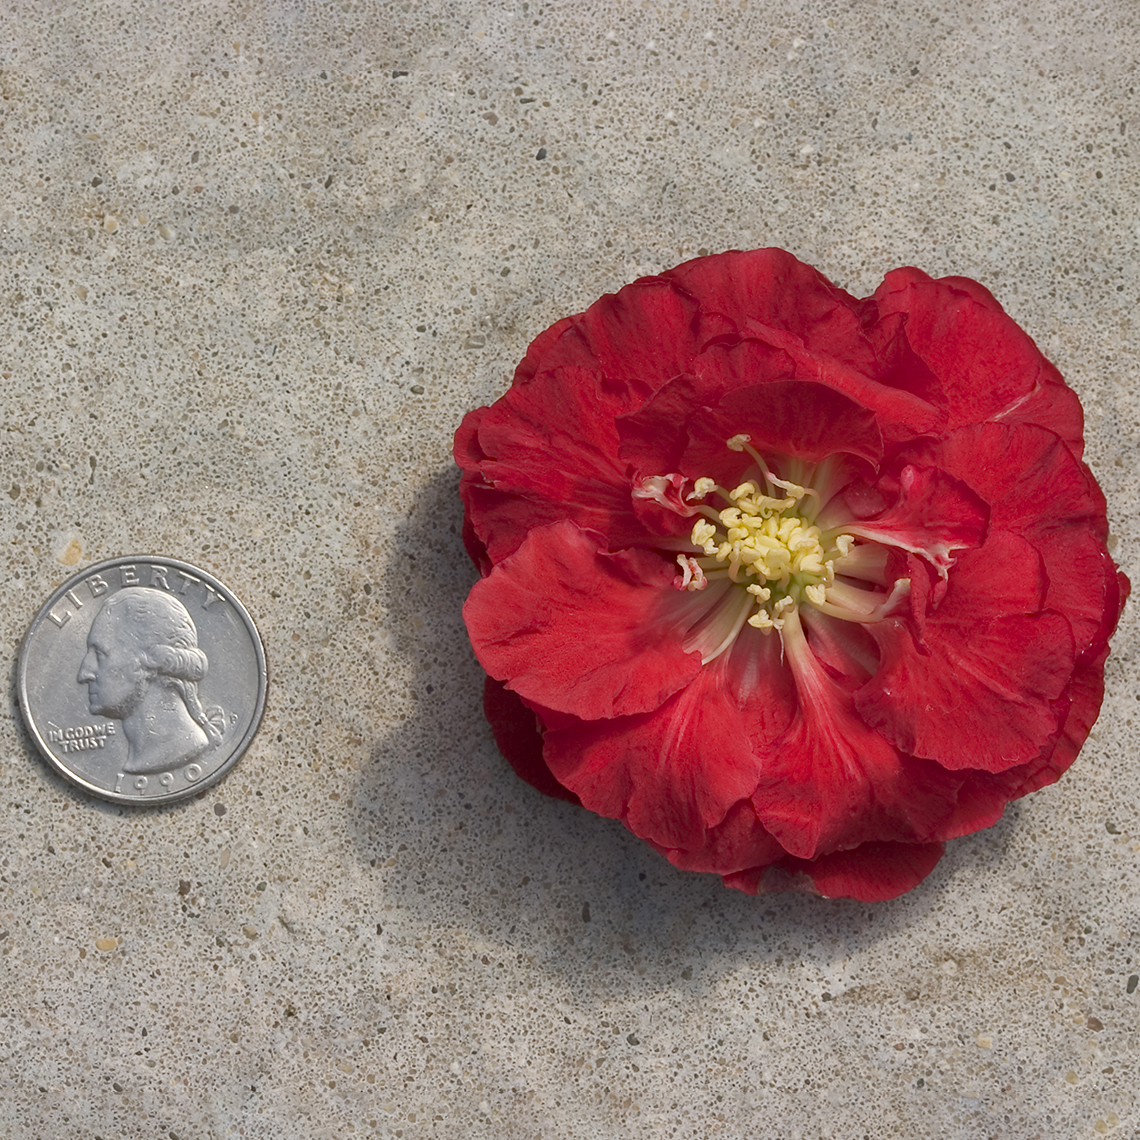 Size comparison of Double Take Scarlet Chaenomeles blooms and quarter